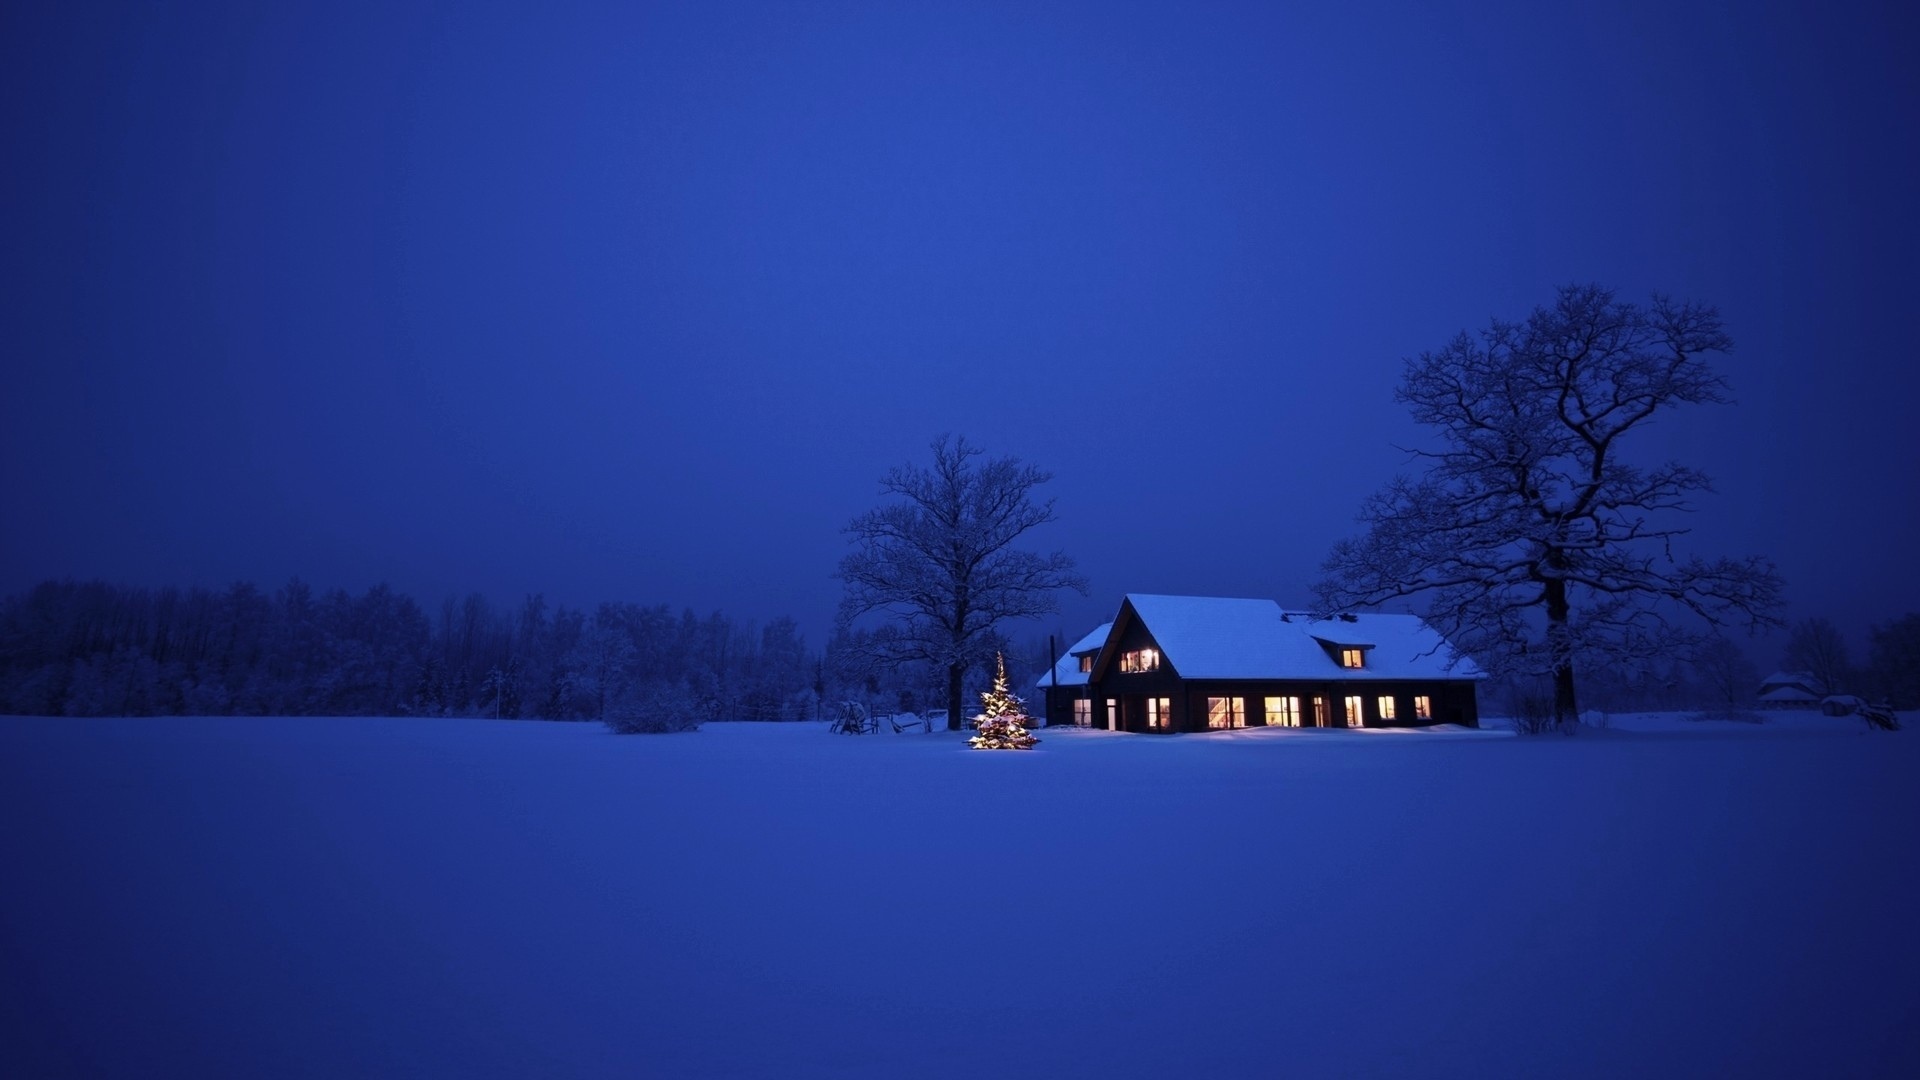 snow, christmas, xmas, new year, landscape, holidays, winter, houses, blue QHD